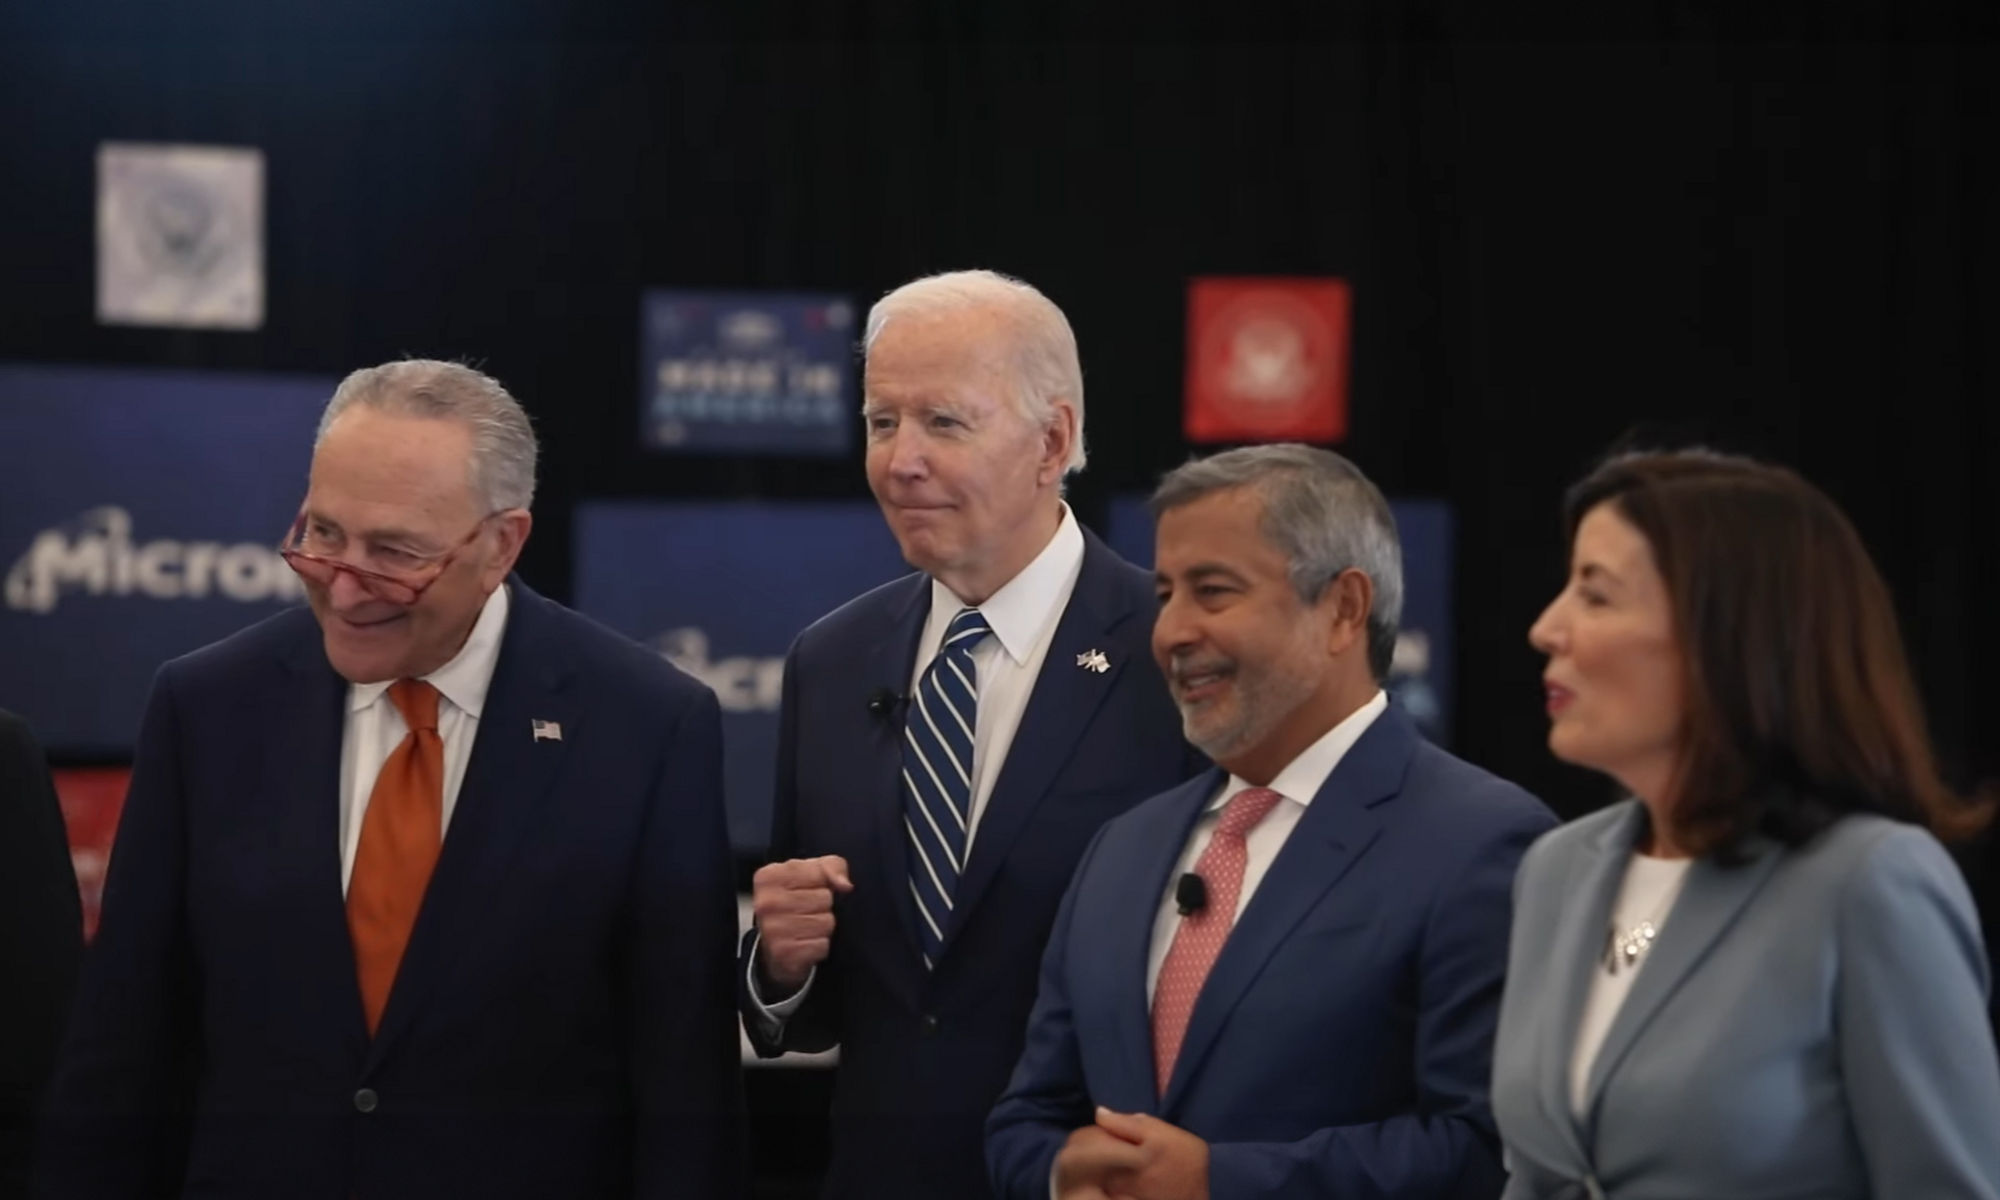 Micron CEO with president Joe Biden and few others